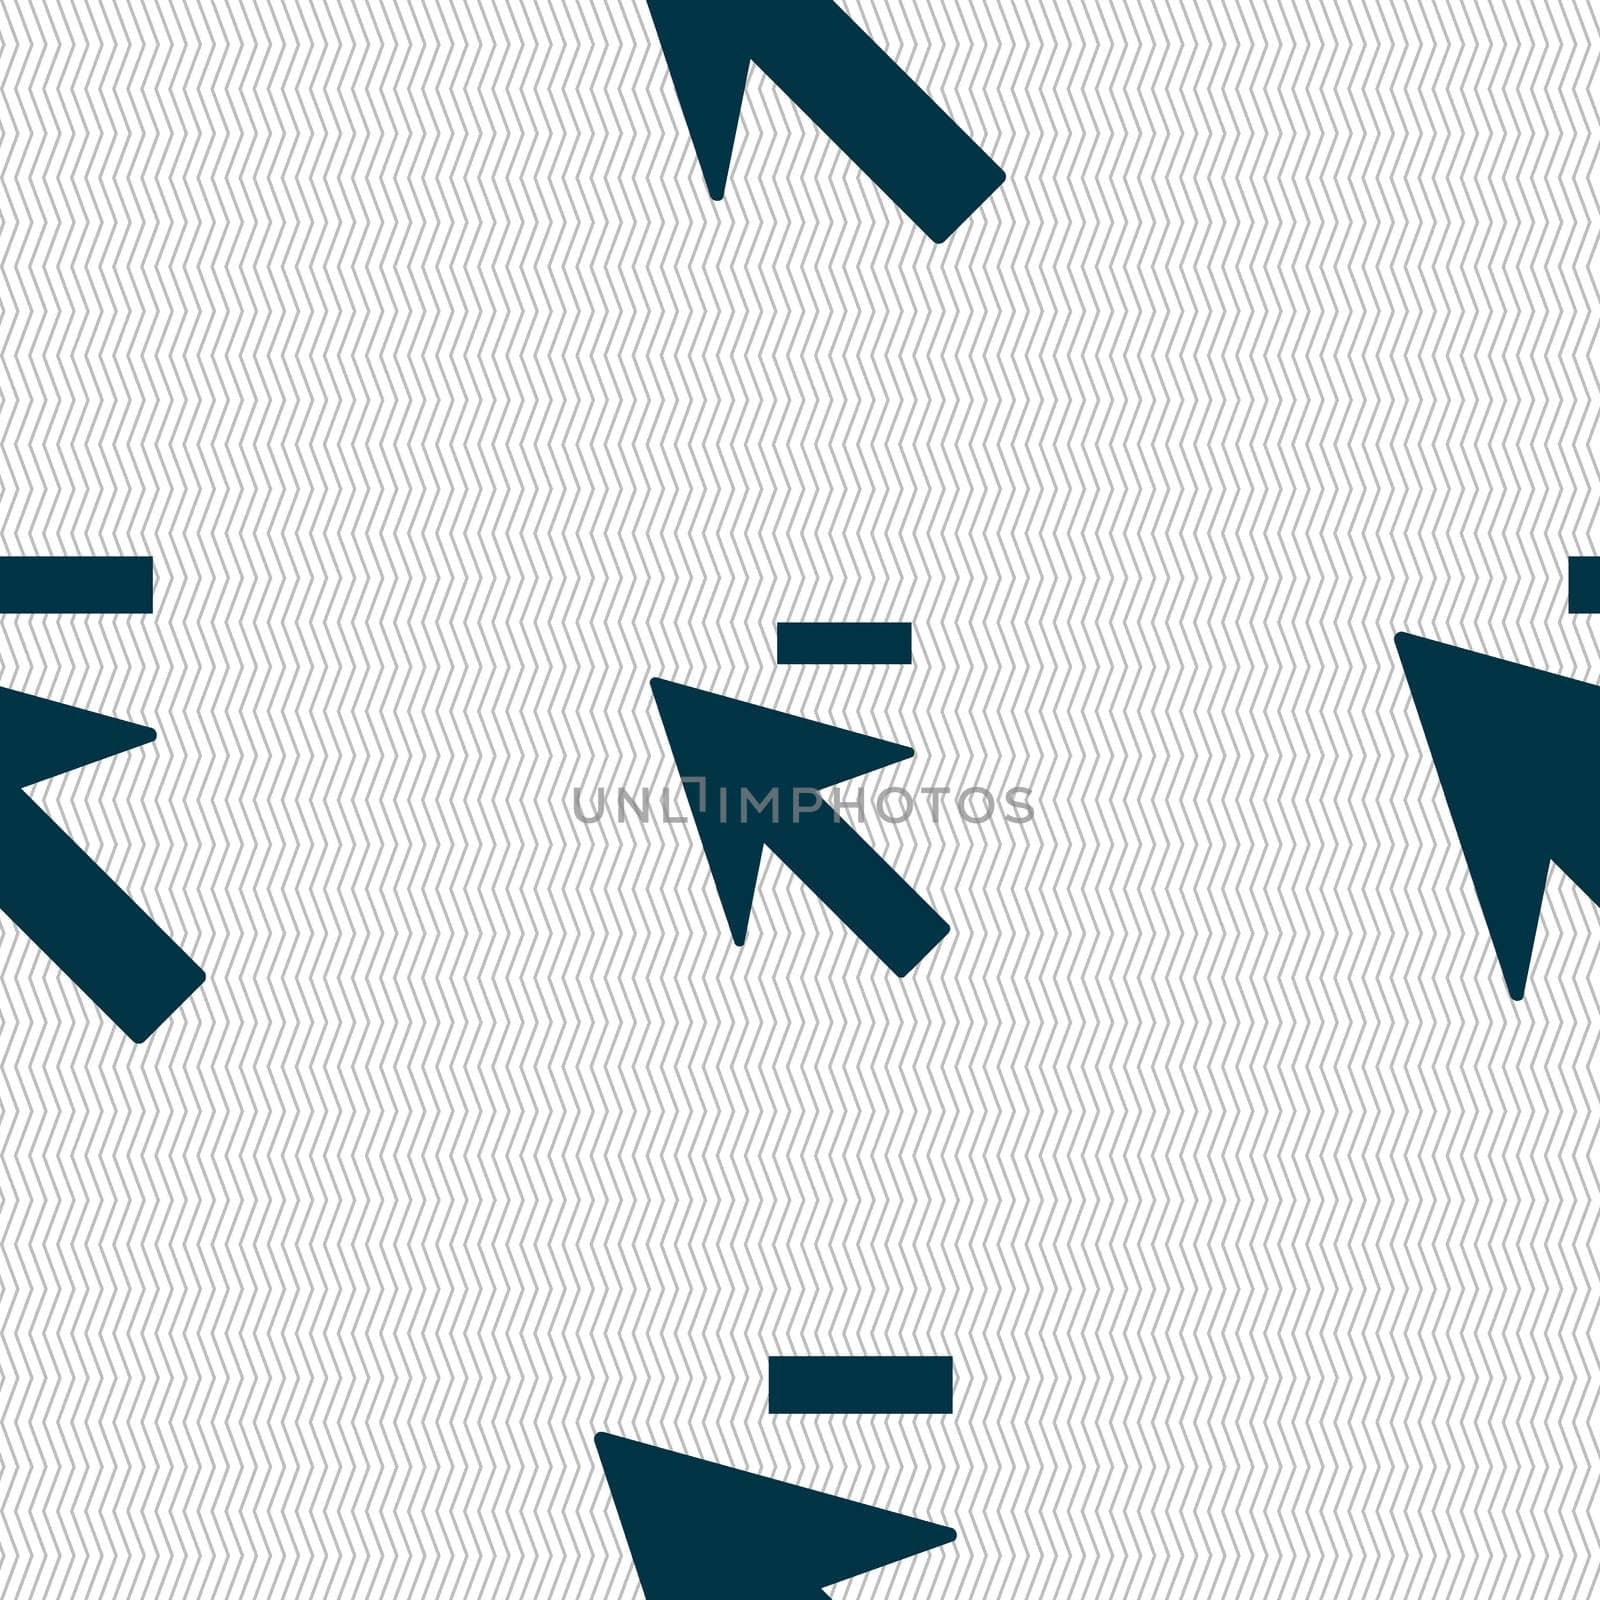 Cursor, arrow minus icon sign. Seamless abstract background with geometric shapes. illustration